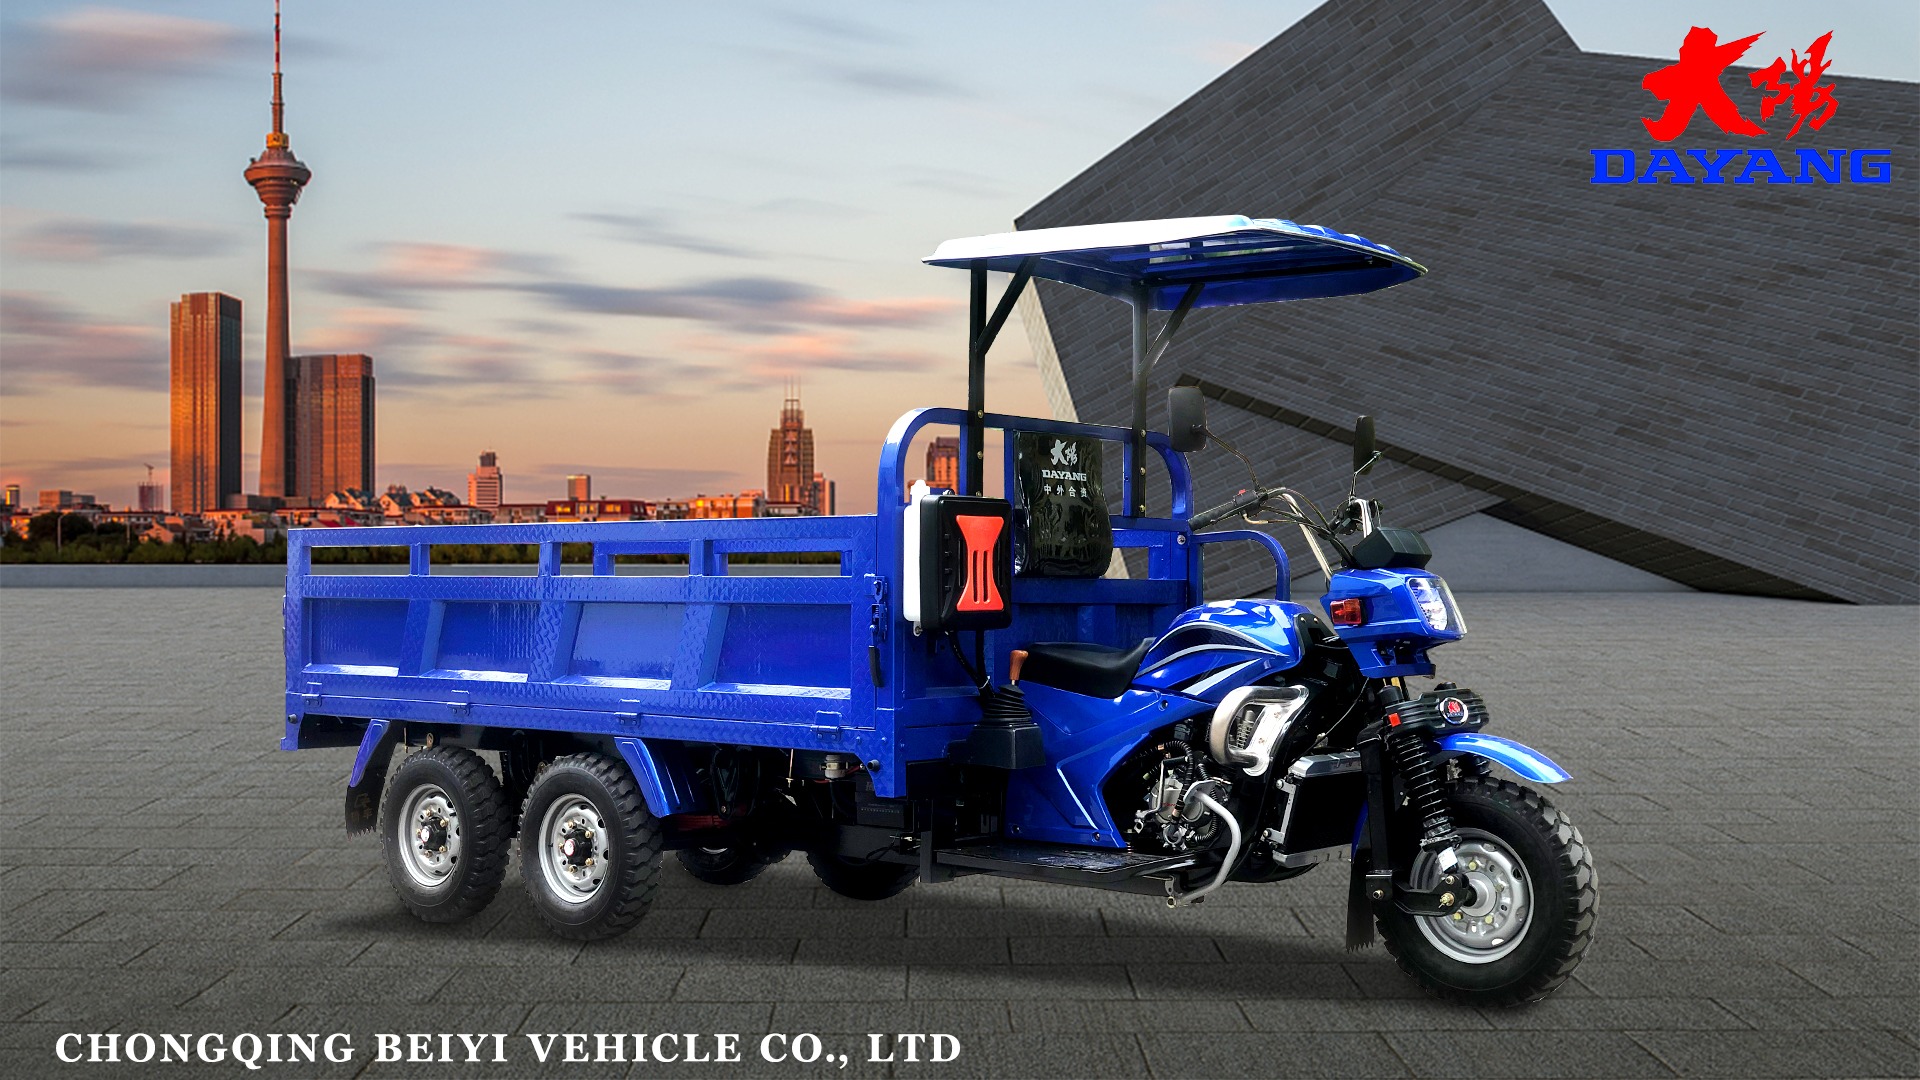 DY-MM2 350CC powerful engine cargo tricycle model for carrying heavy goods